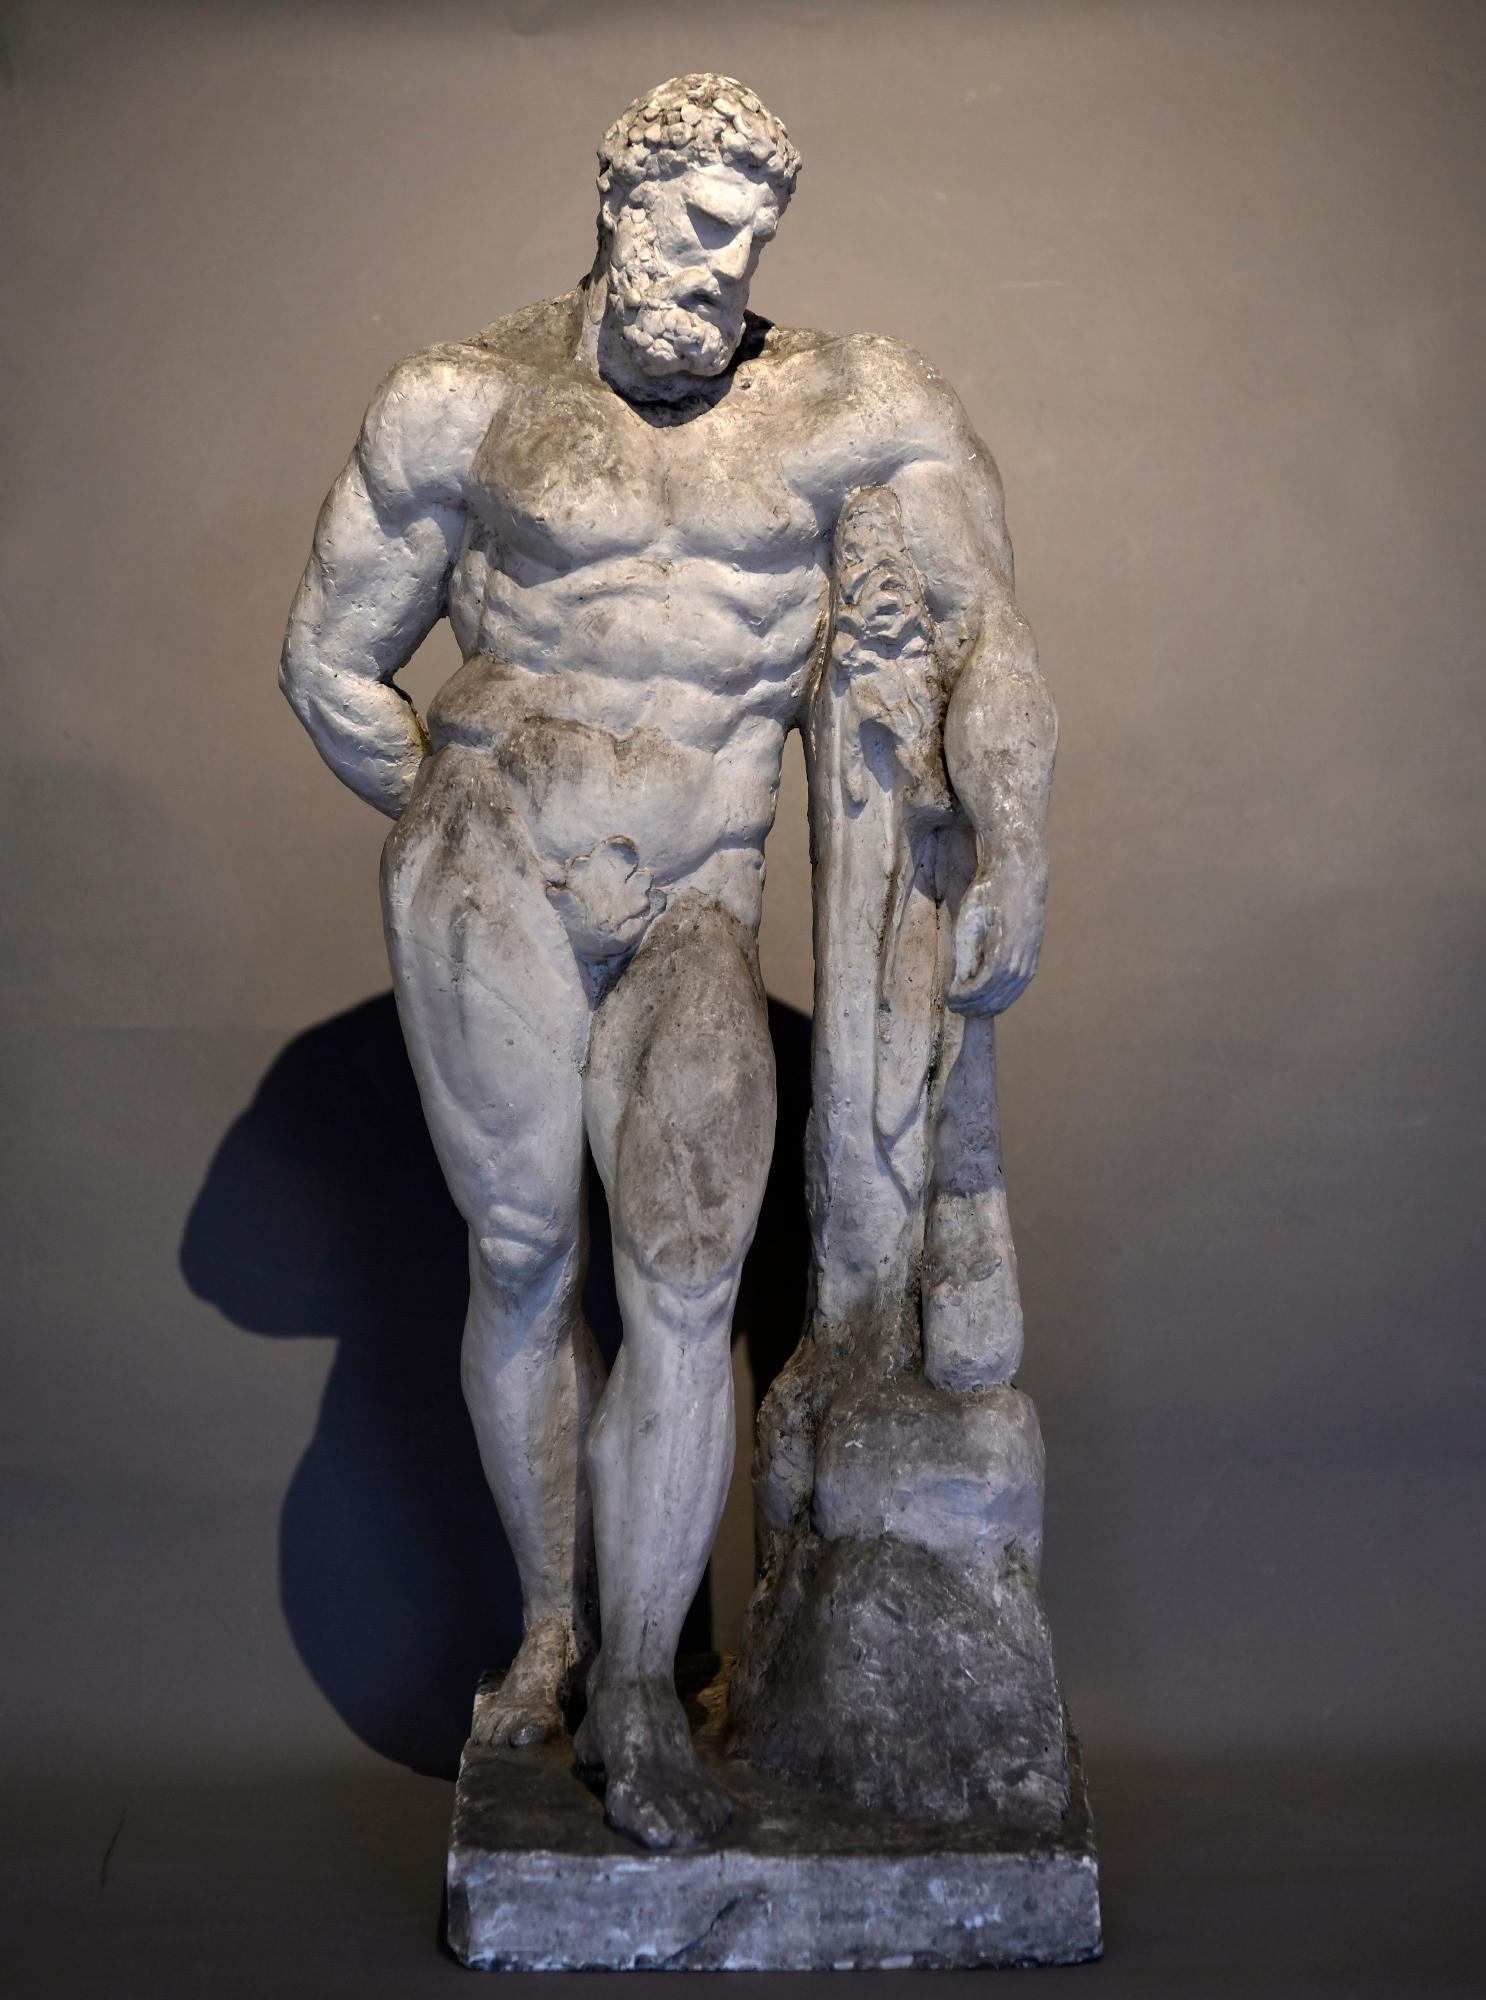 Herkules Farnese model, Plaster, 1890-1910, Italy, Grand Tour
Plaster model after the famous Herkules Farnese in the national museum in Naples 
1890-1910
The prominently sited statue was well liked by the Ancient Romans, and copies have been